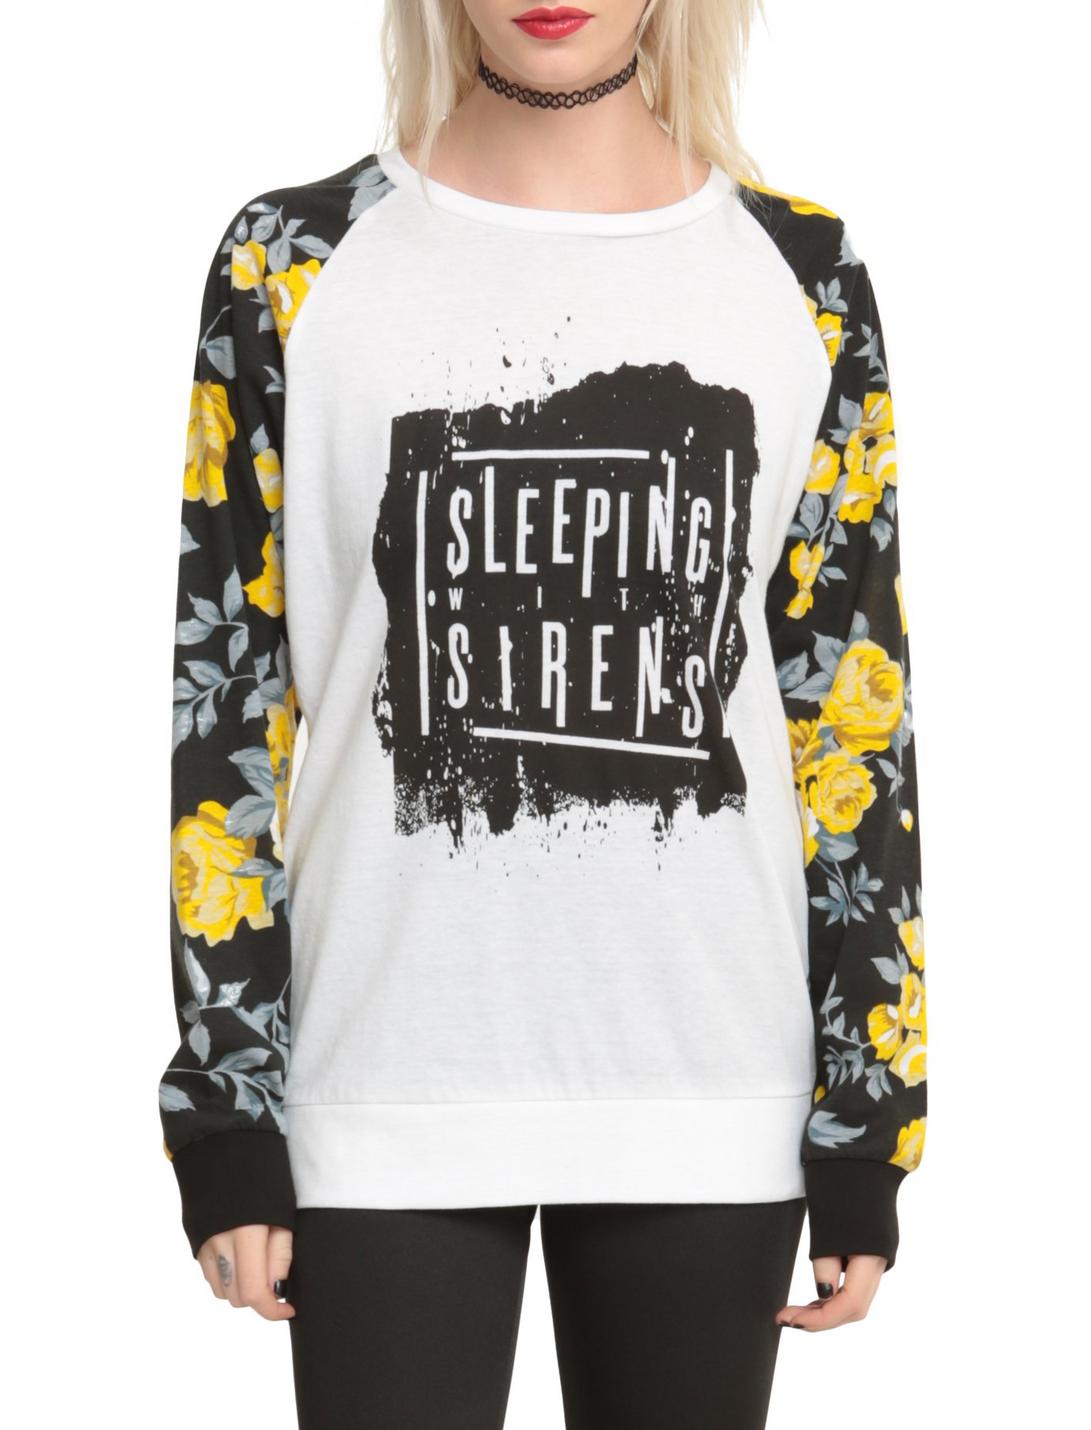 Sleeping With Sirens Floral Sleeve Girls Pullover Top, BLACK, hi-res